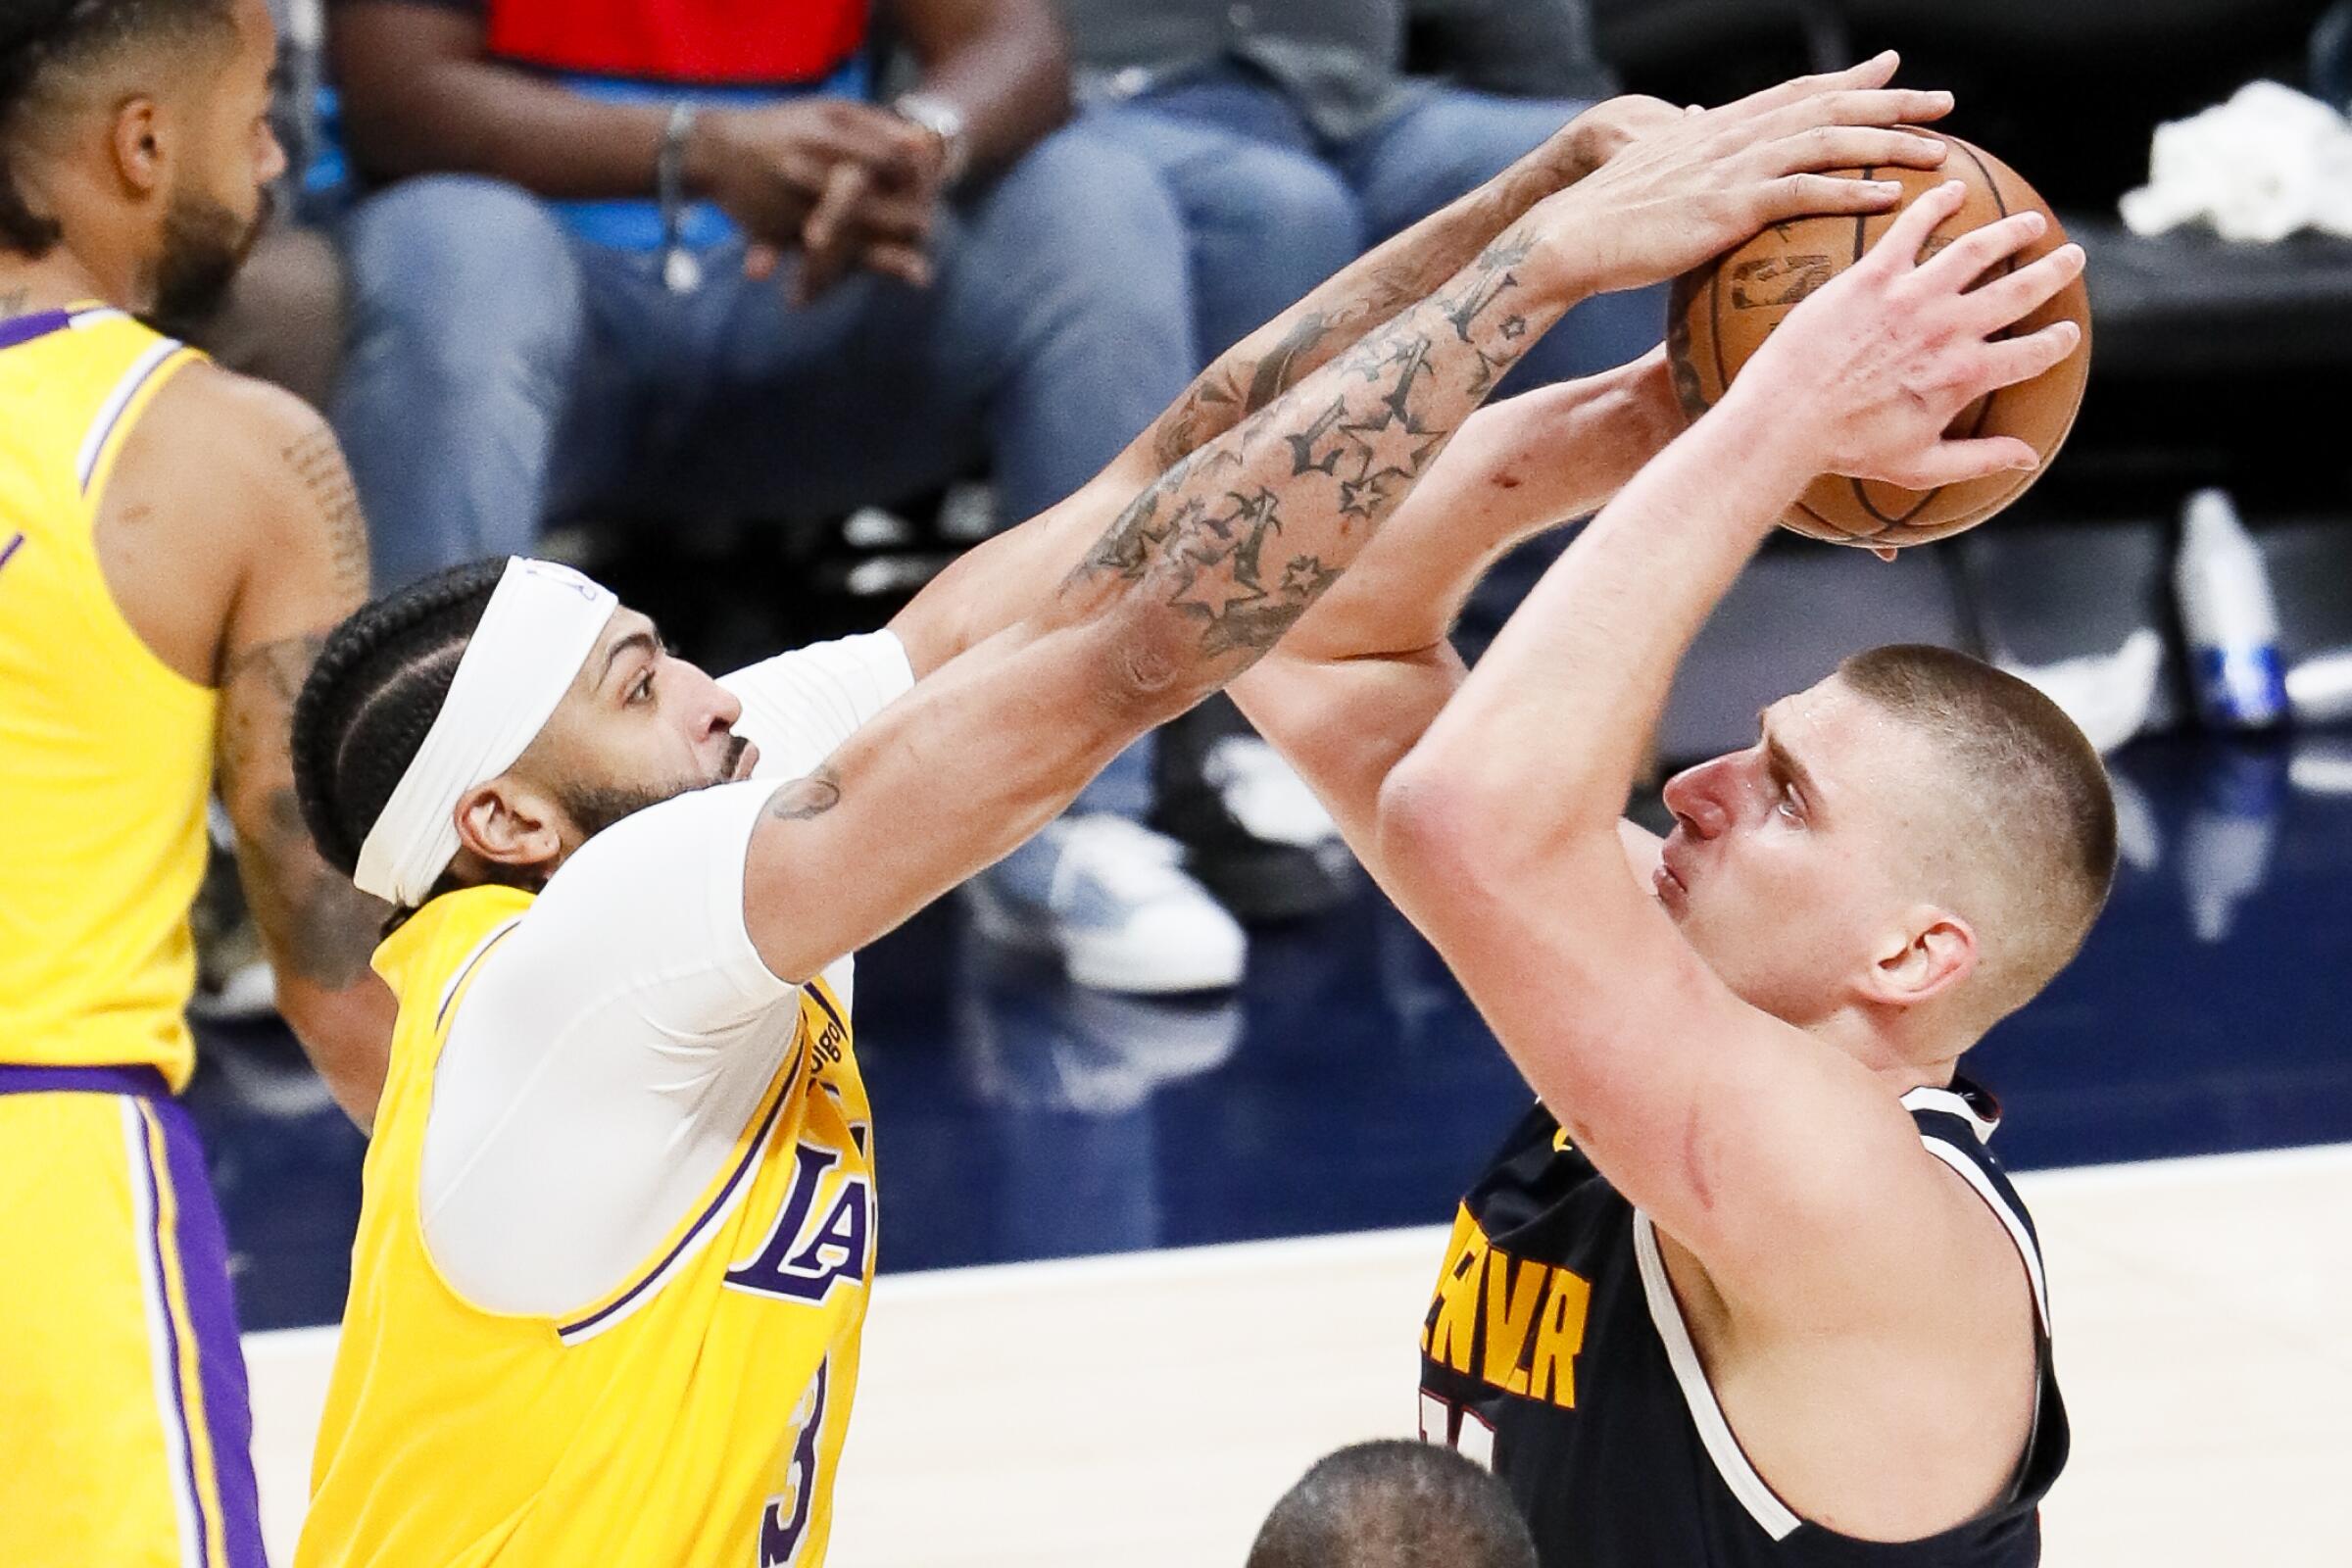 Lakers forward Anthony Davis, left, reaches with both arms above the head of Nuggets center Nikola Jokic to block his shot.